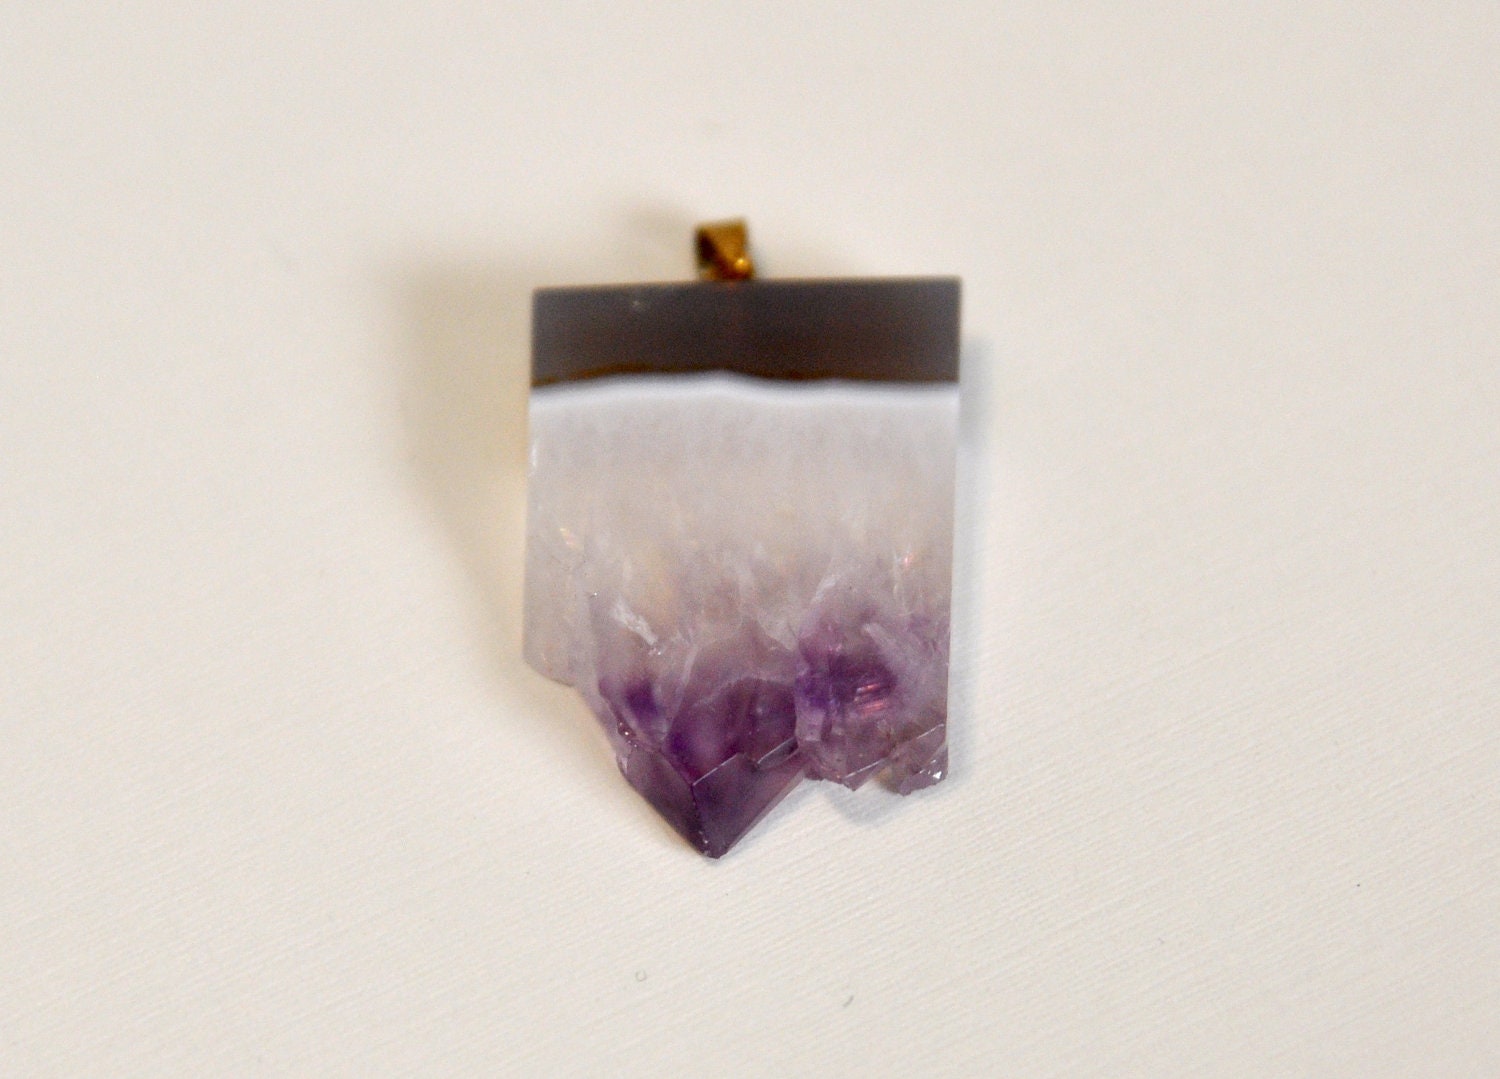 Raw Amethyst Stone Pendant - SALE ITEM deeply discounted